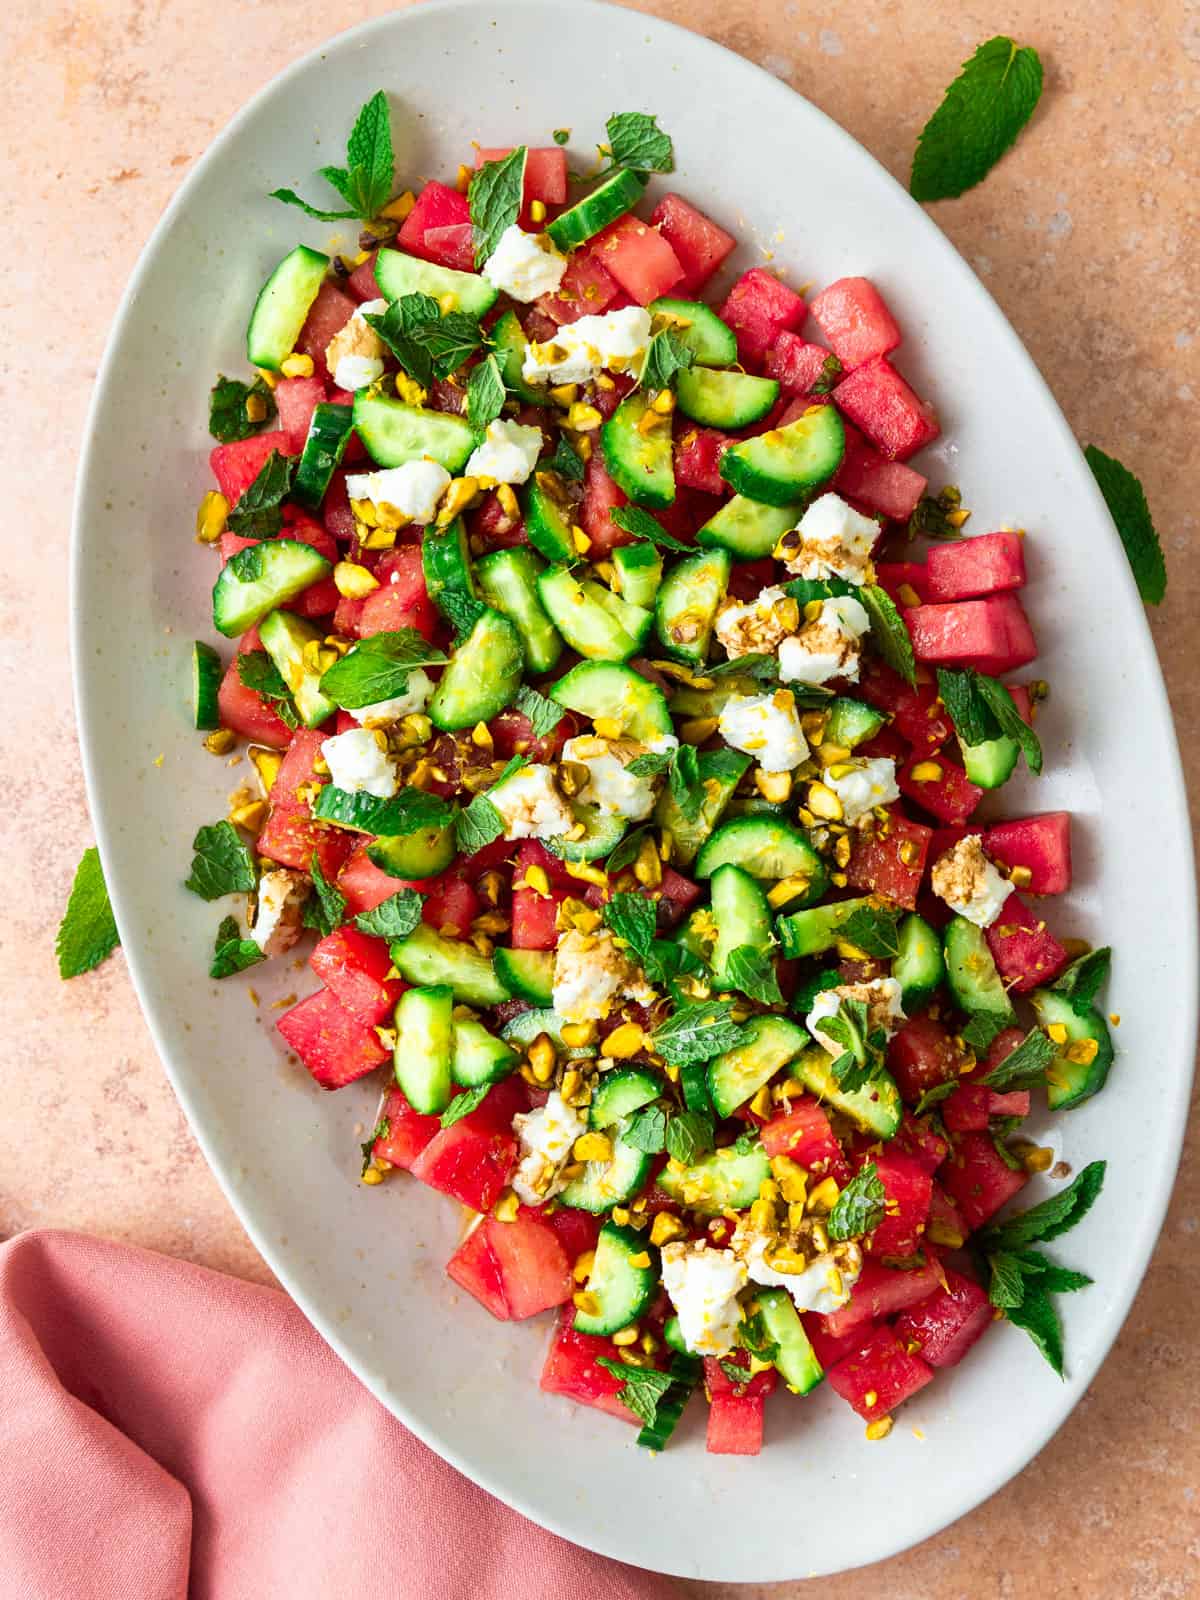 Watermelon cucumber salad layered with crumbled goat cheese, chopped pistachios and fresh mint.